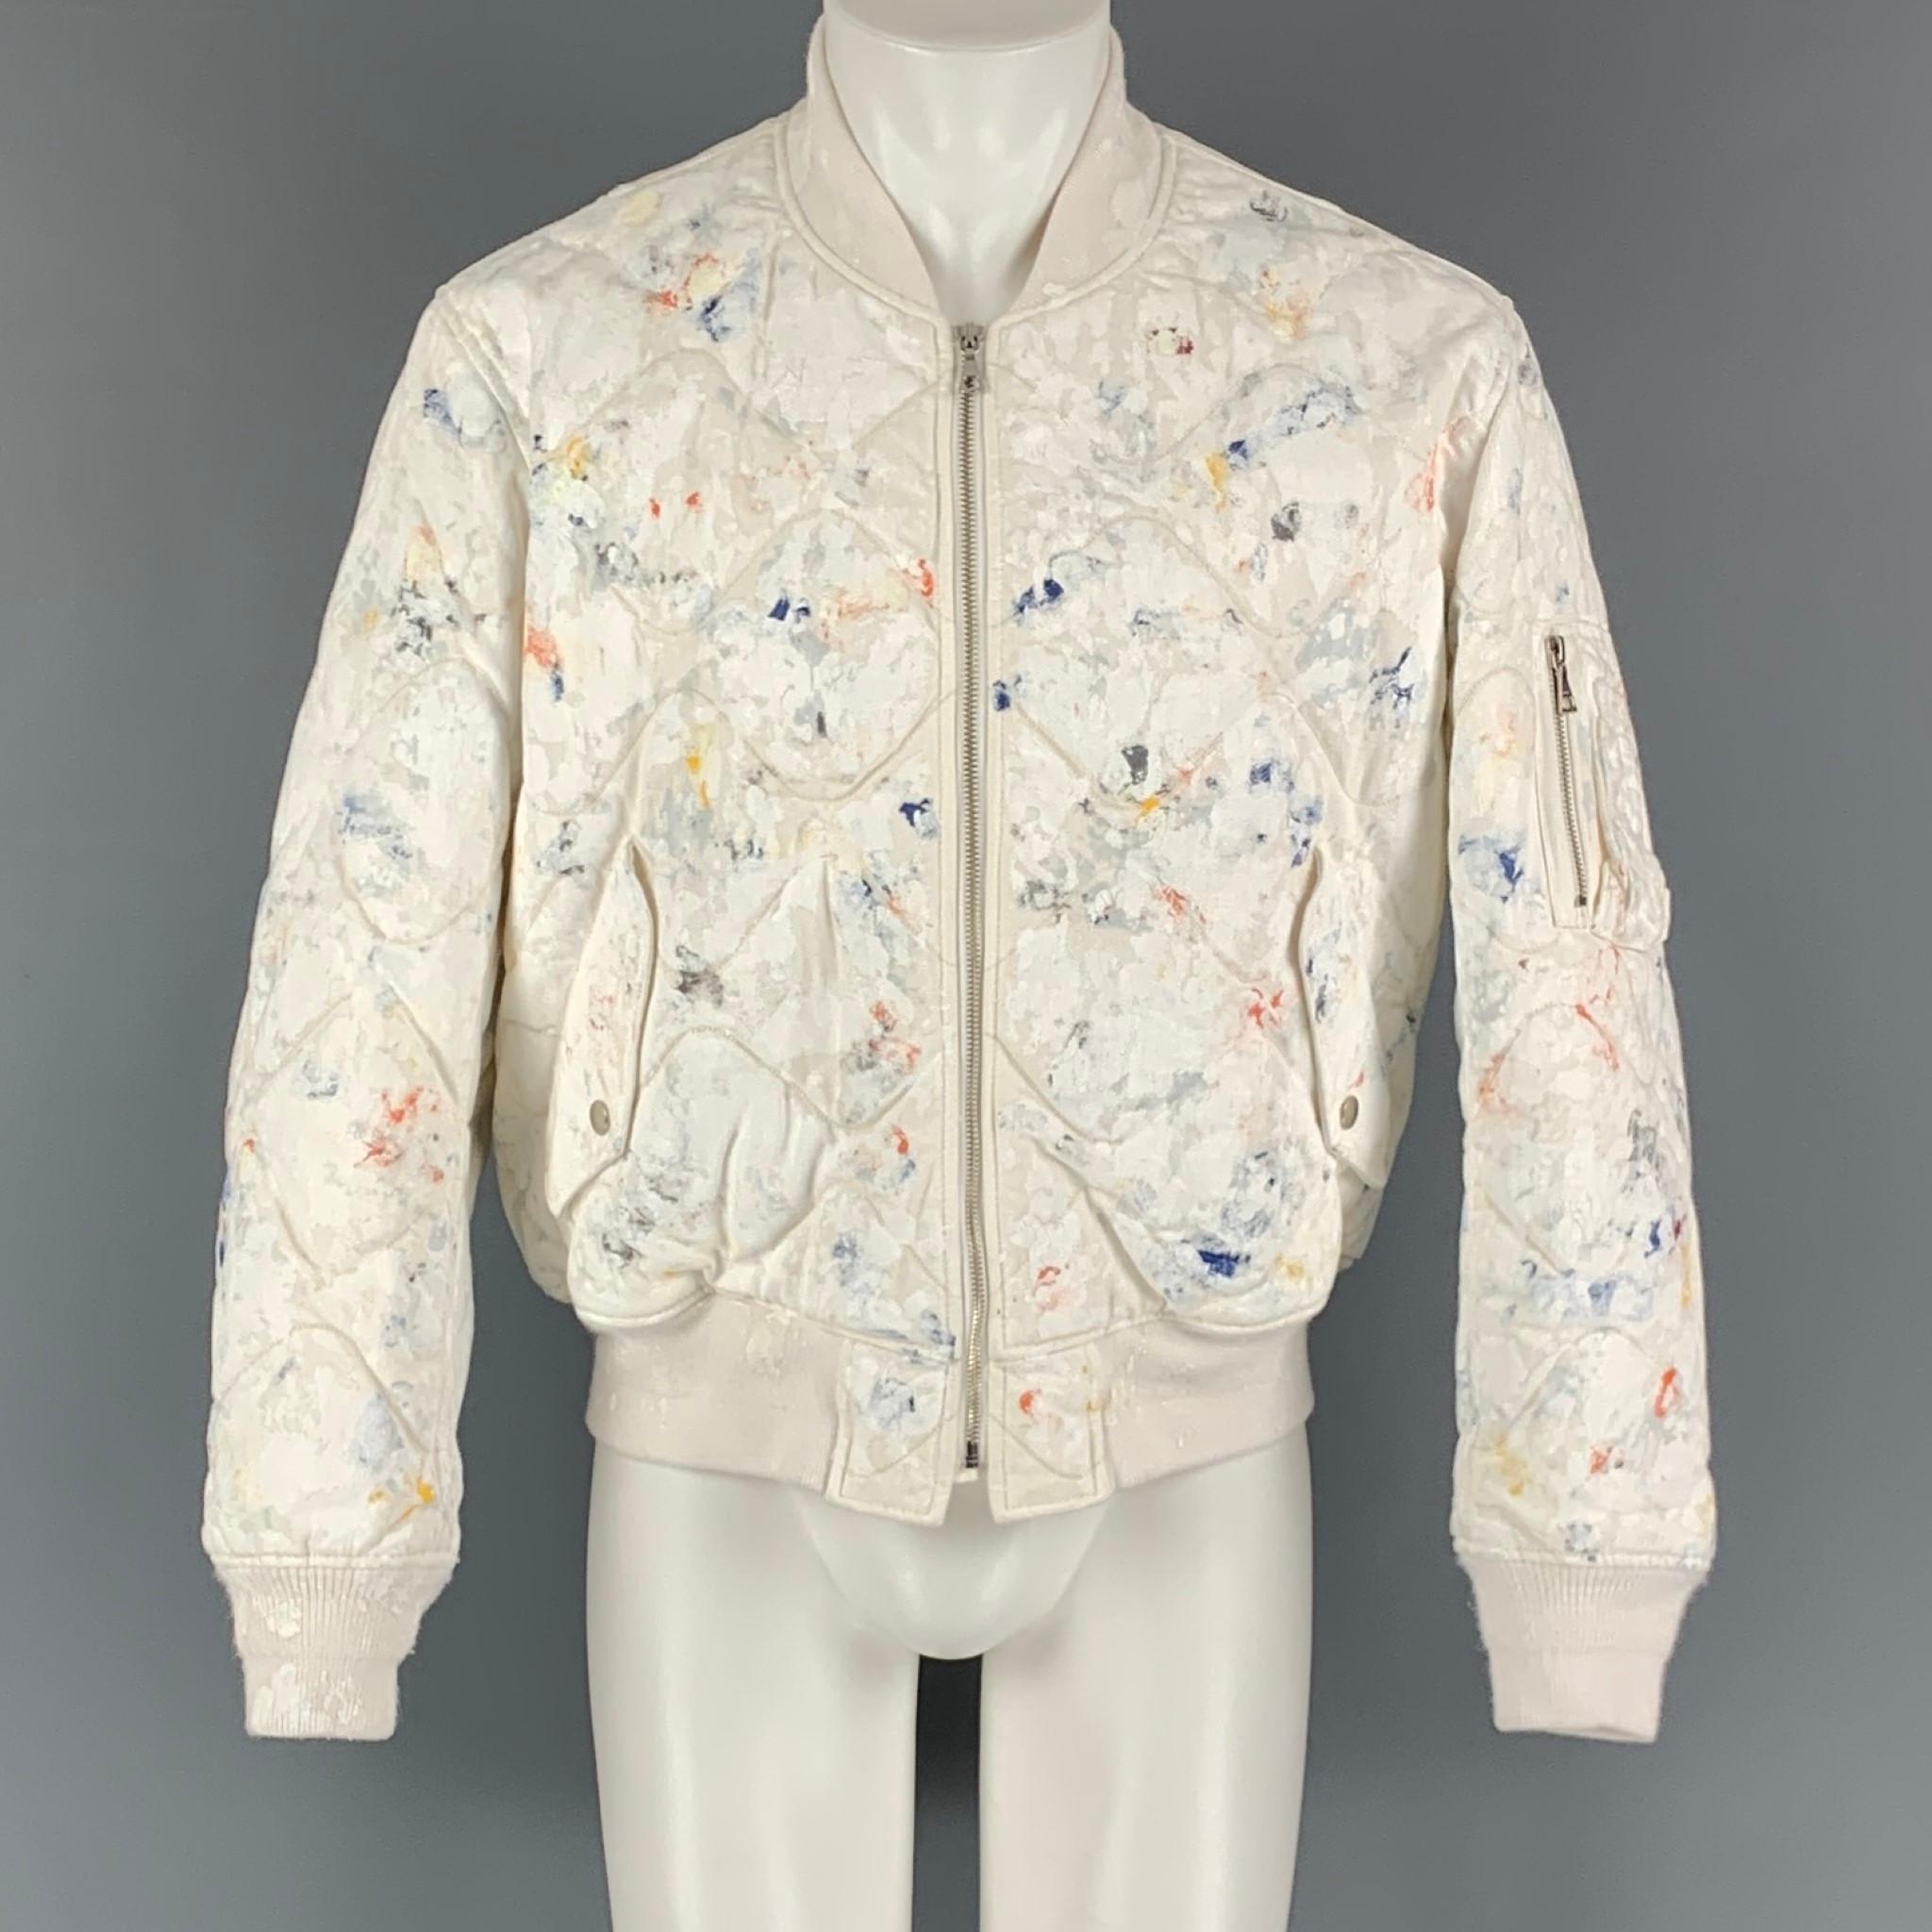 JOHN ELLIOTT jacket comes in a white cotton canvas featuring a bomber quilted style, multi- colour splattered details, and zip up closure. Made in Japan.

Excellent Pre- Owned Conditions.
Marked: M

Measurements:

Shoulder: 19 in.
Bust: 50